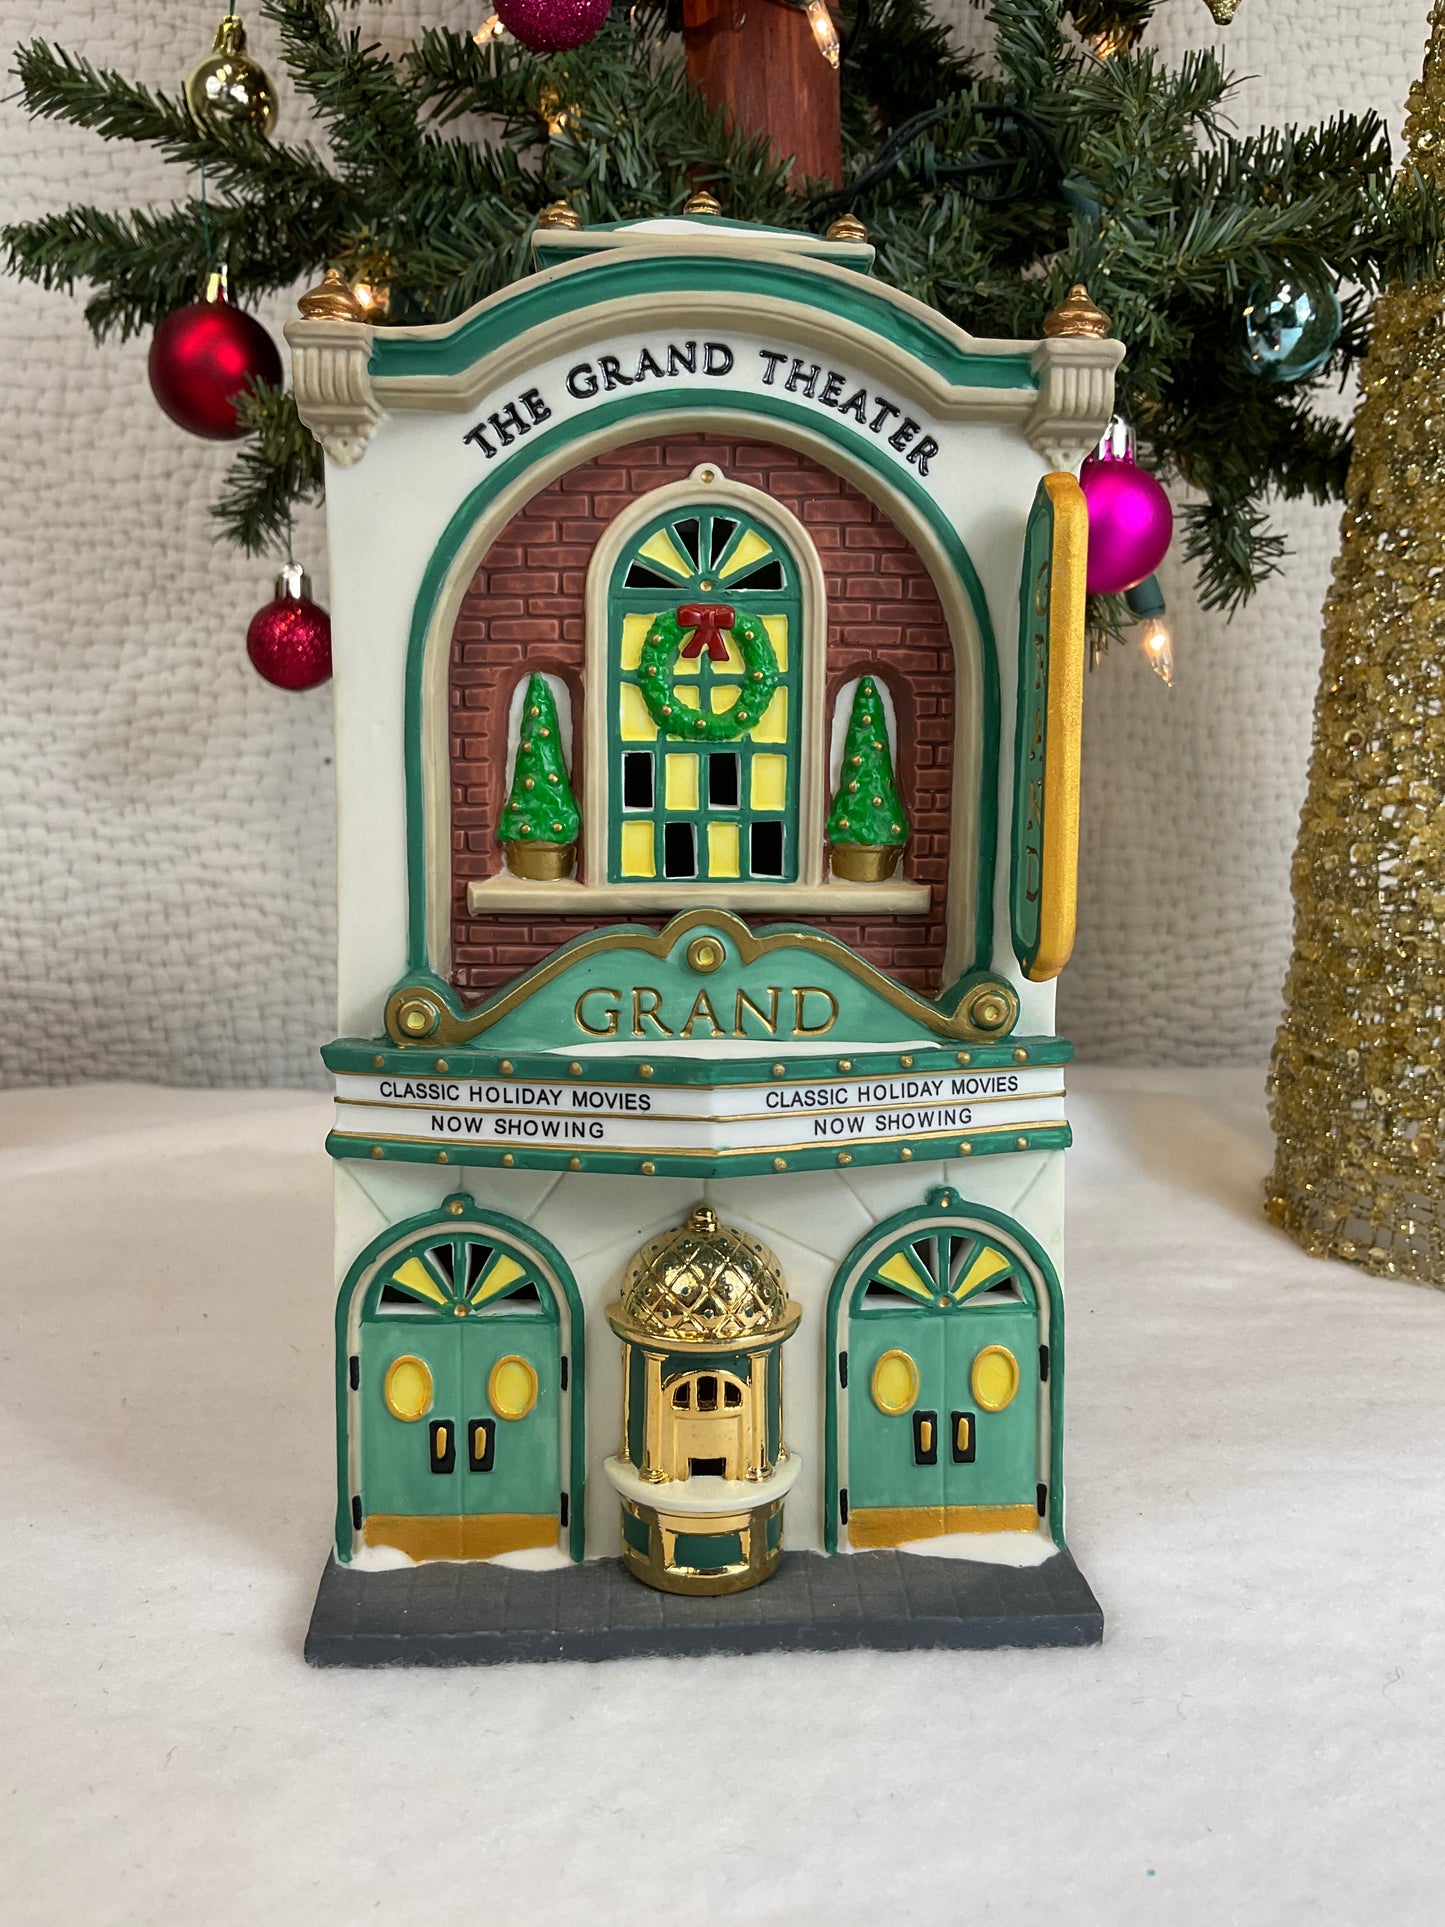 Dept. 56 "Christmas In The City Series", Sold Separately